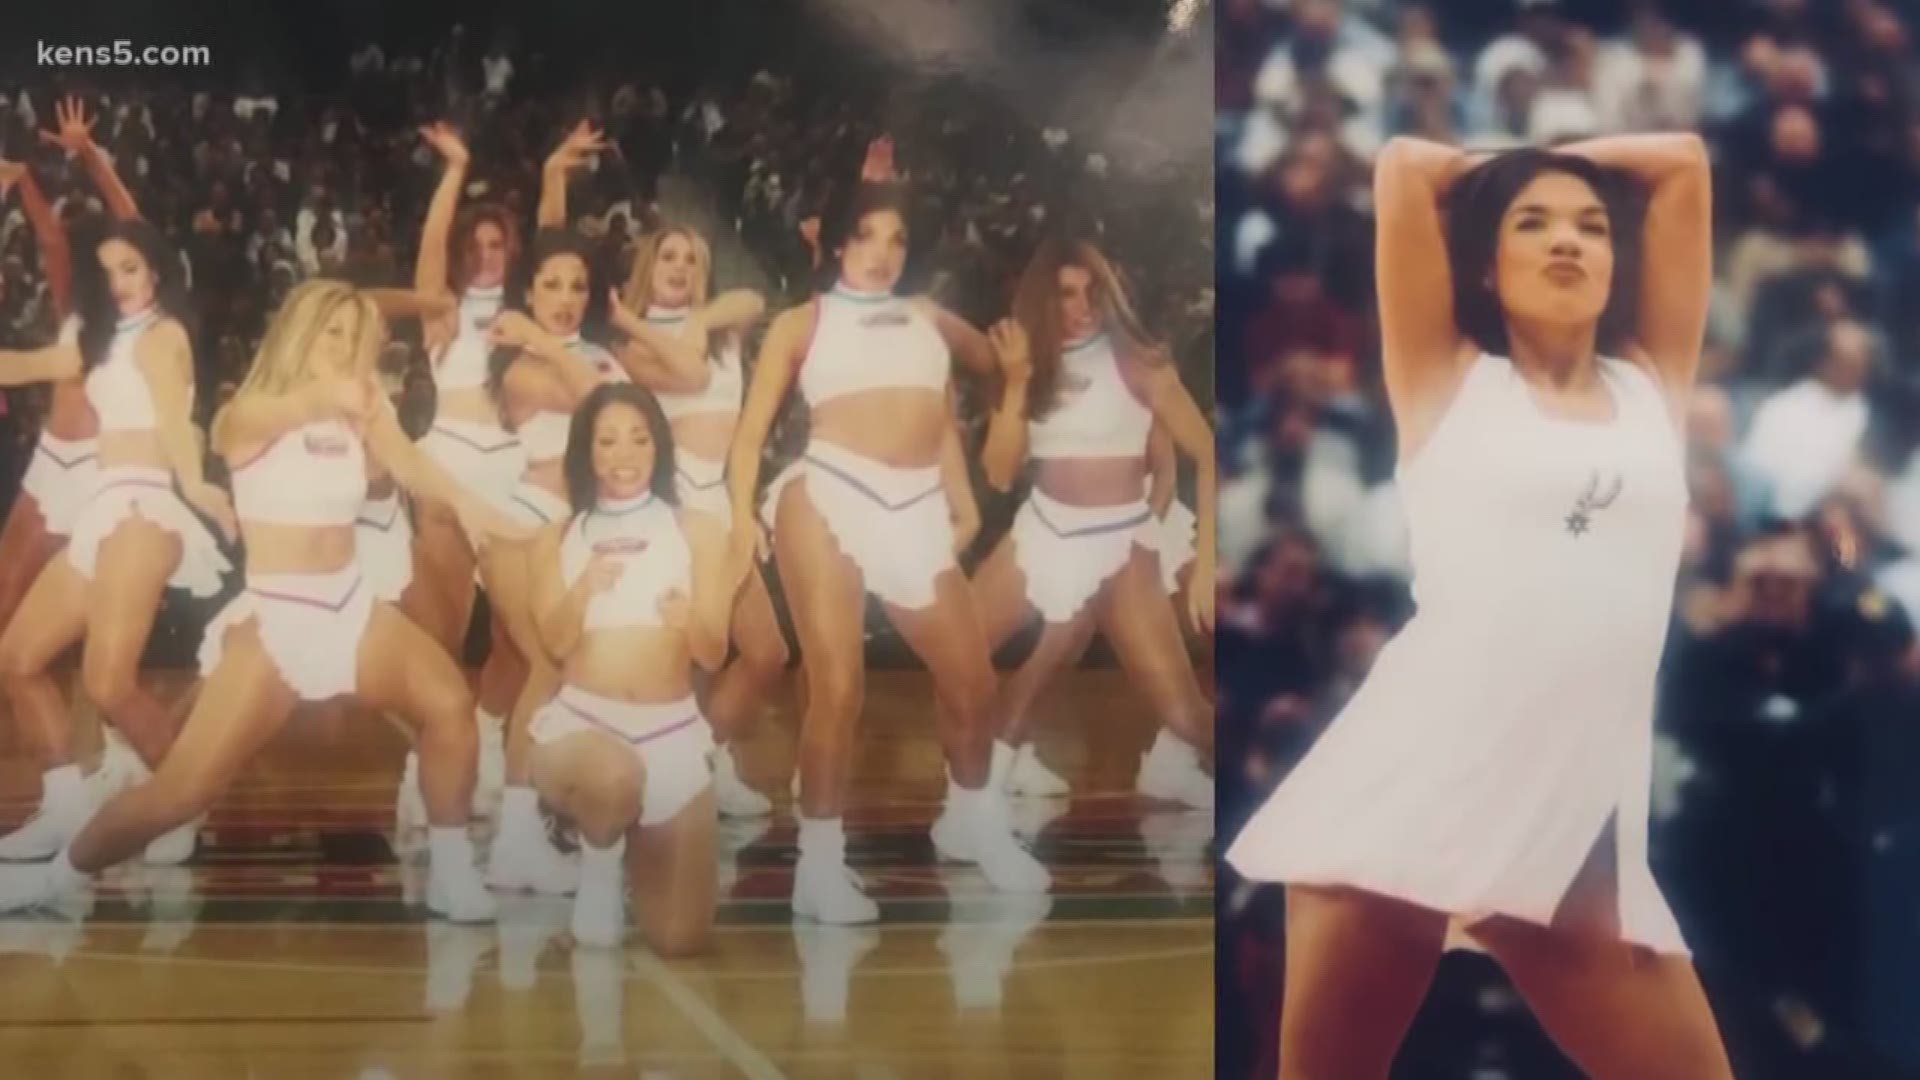 A former spurs silver dancer is creating an all-woman dance team, bringing the spirit back to the San Antonio community.